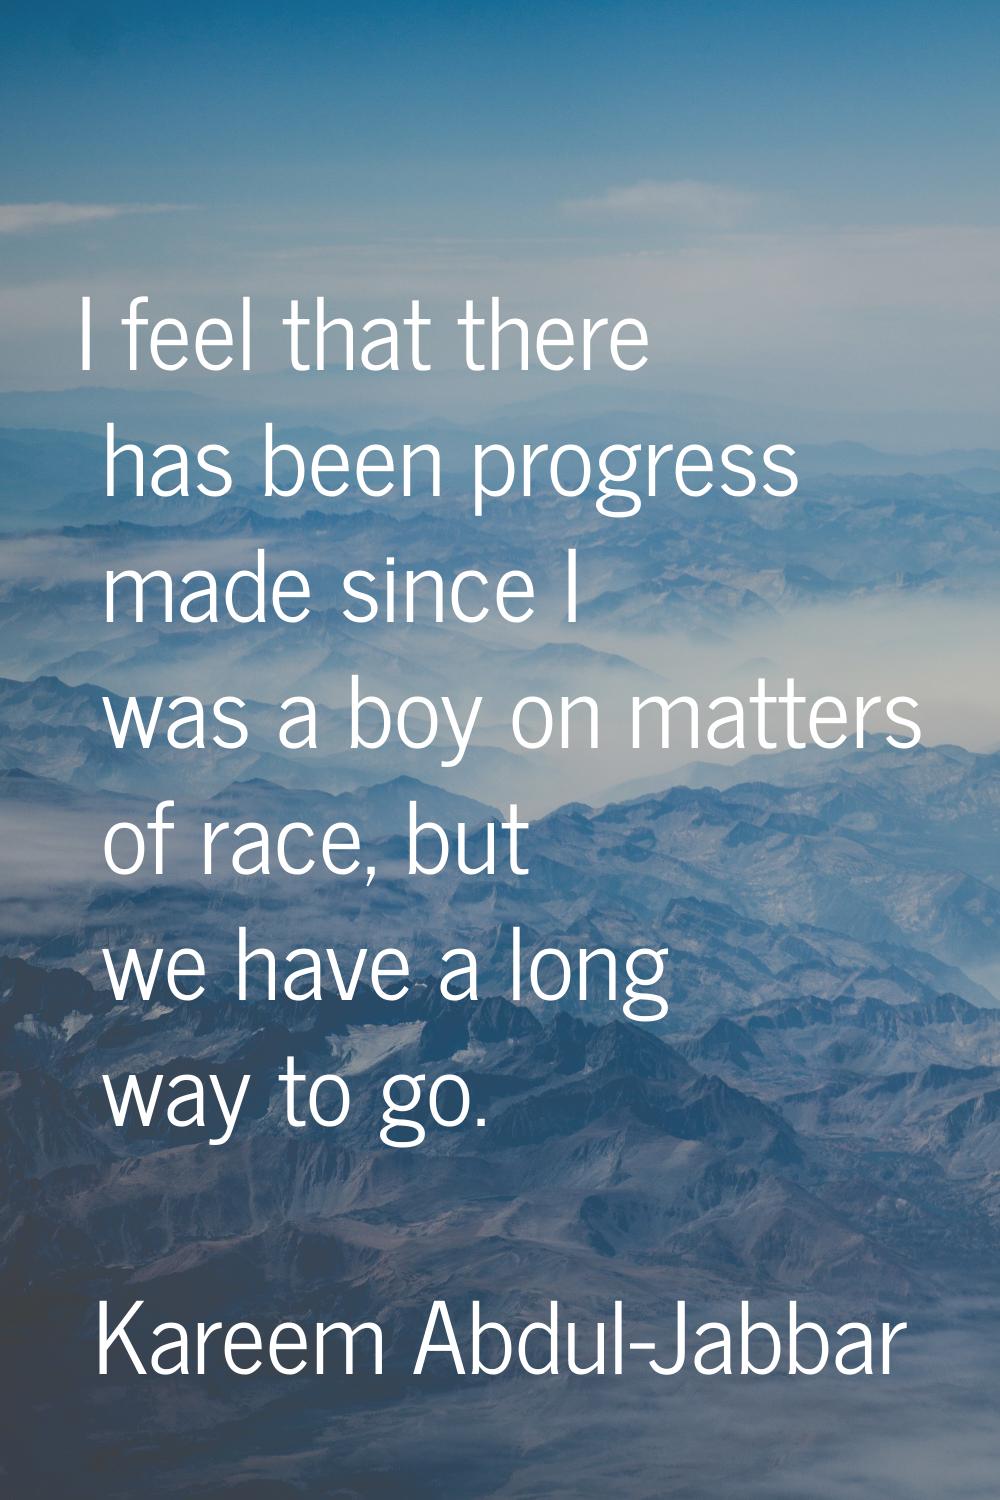 I feel that there has been progress made since I was a boy on matters of race, but we have a long w